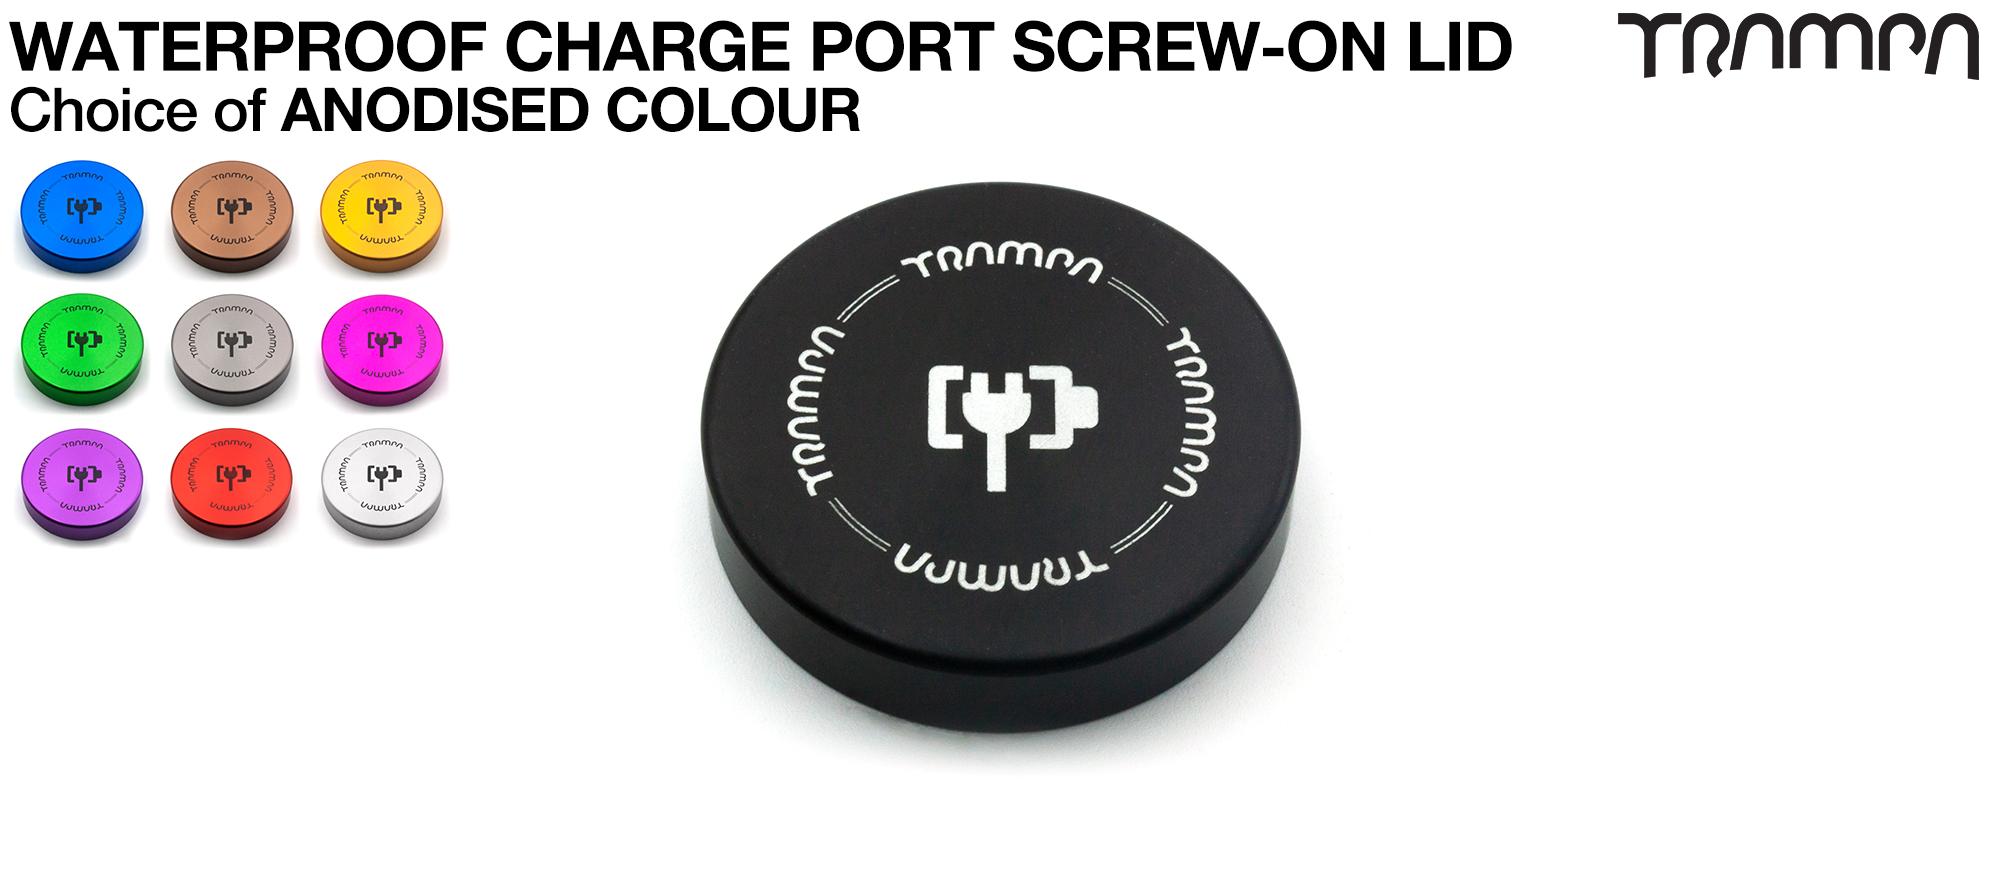 Charge Point TOP - Anodised 